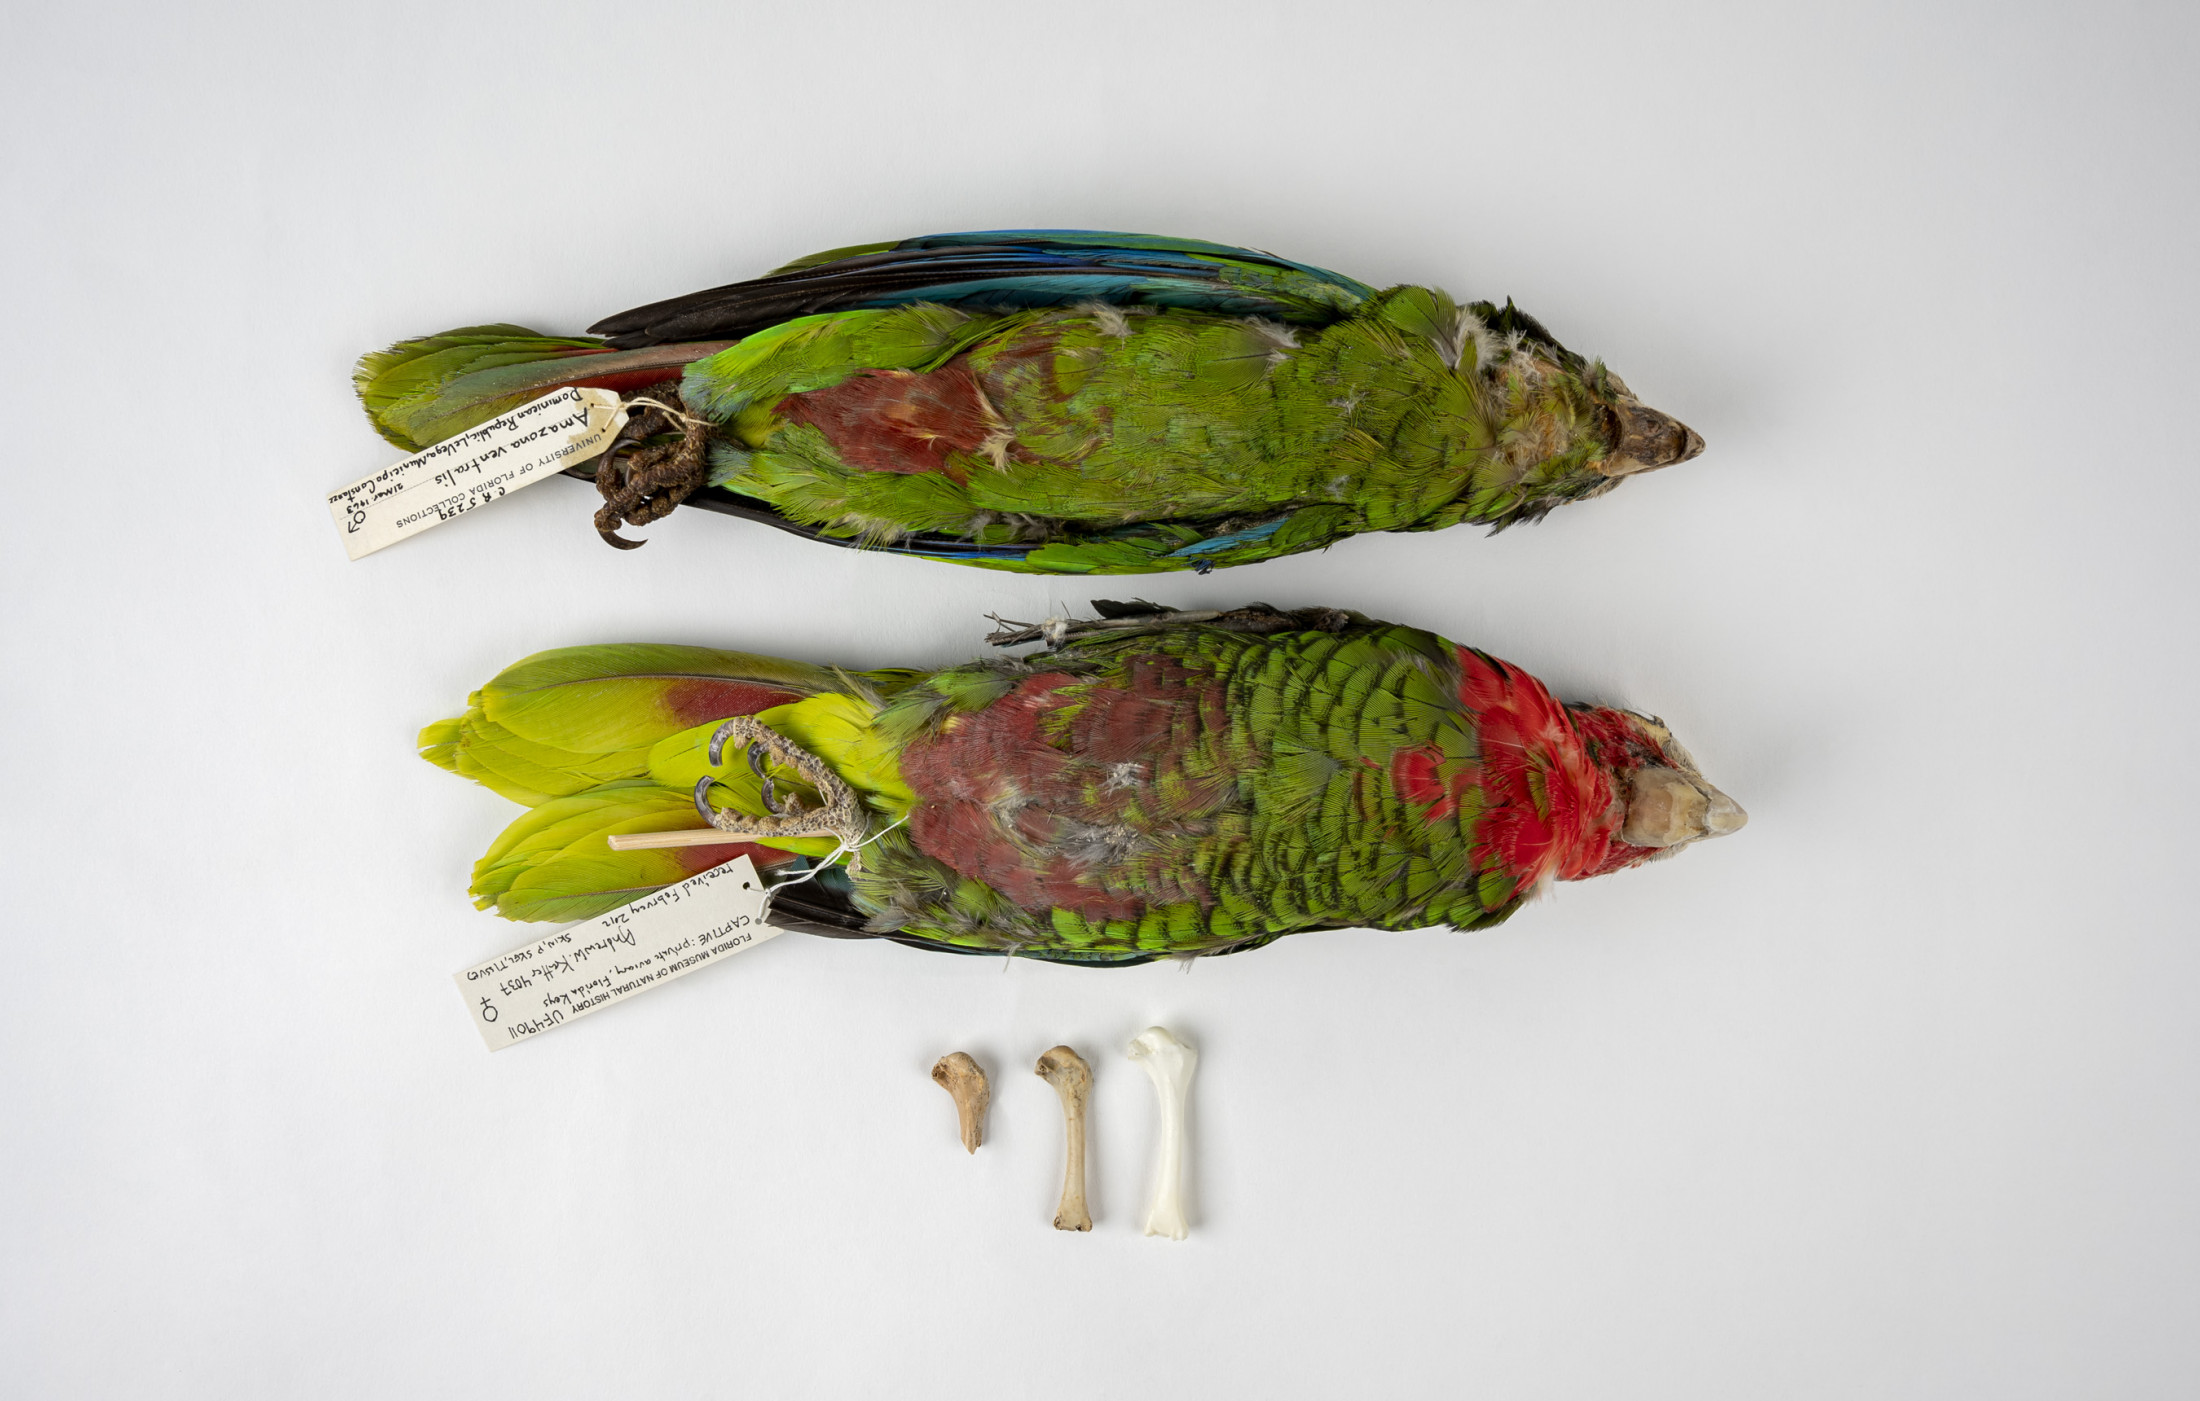 Two parrot specimens arranged on a white surface above three parrot fossils.